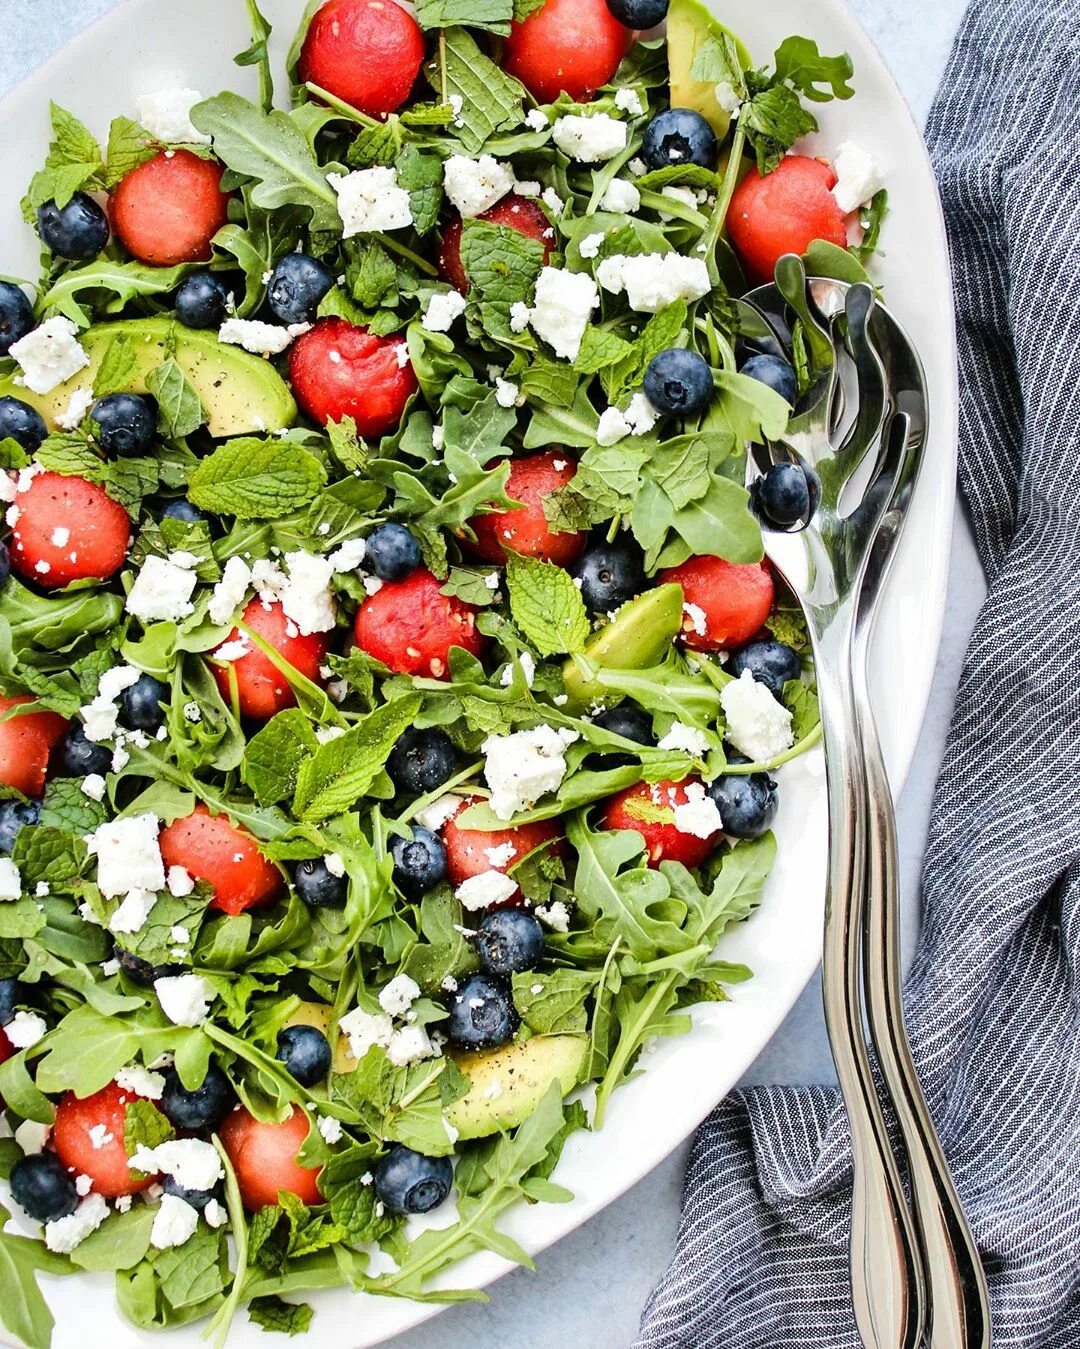 This watermelon salad made with feta, arugula, blueberries, and mint SERIOU...